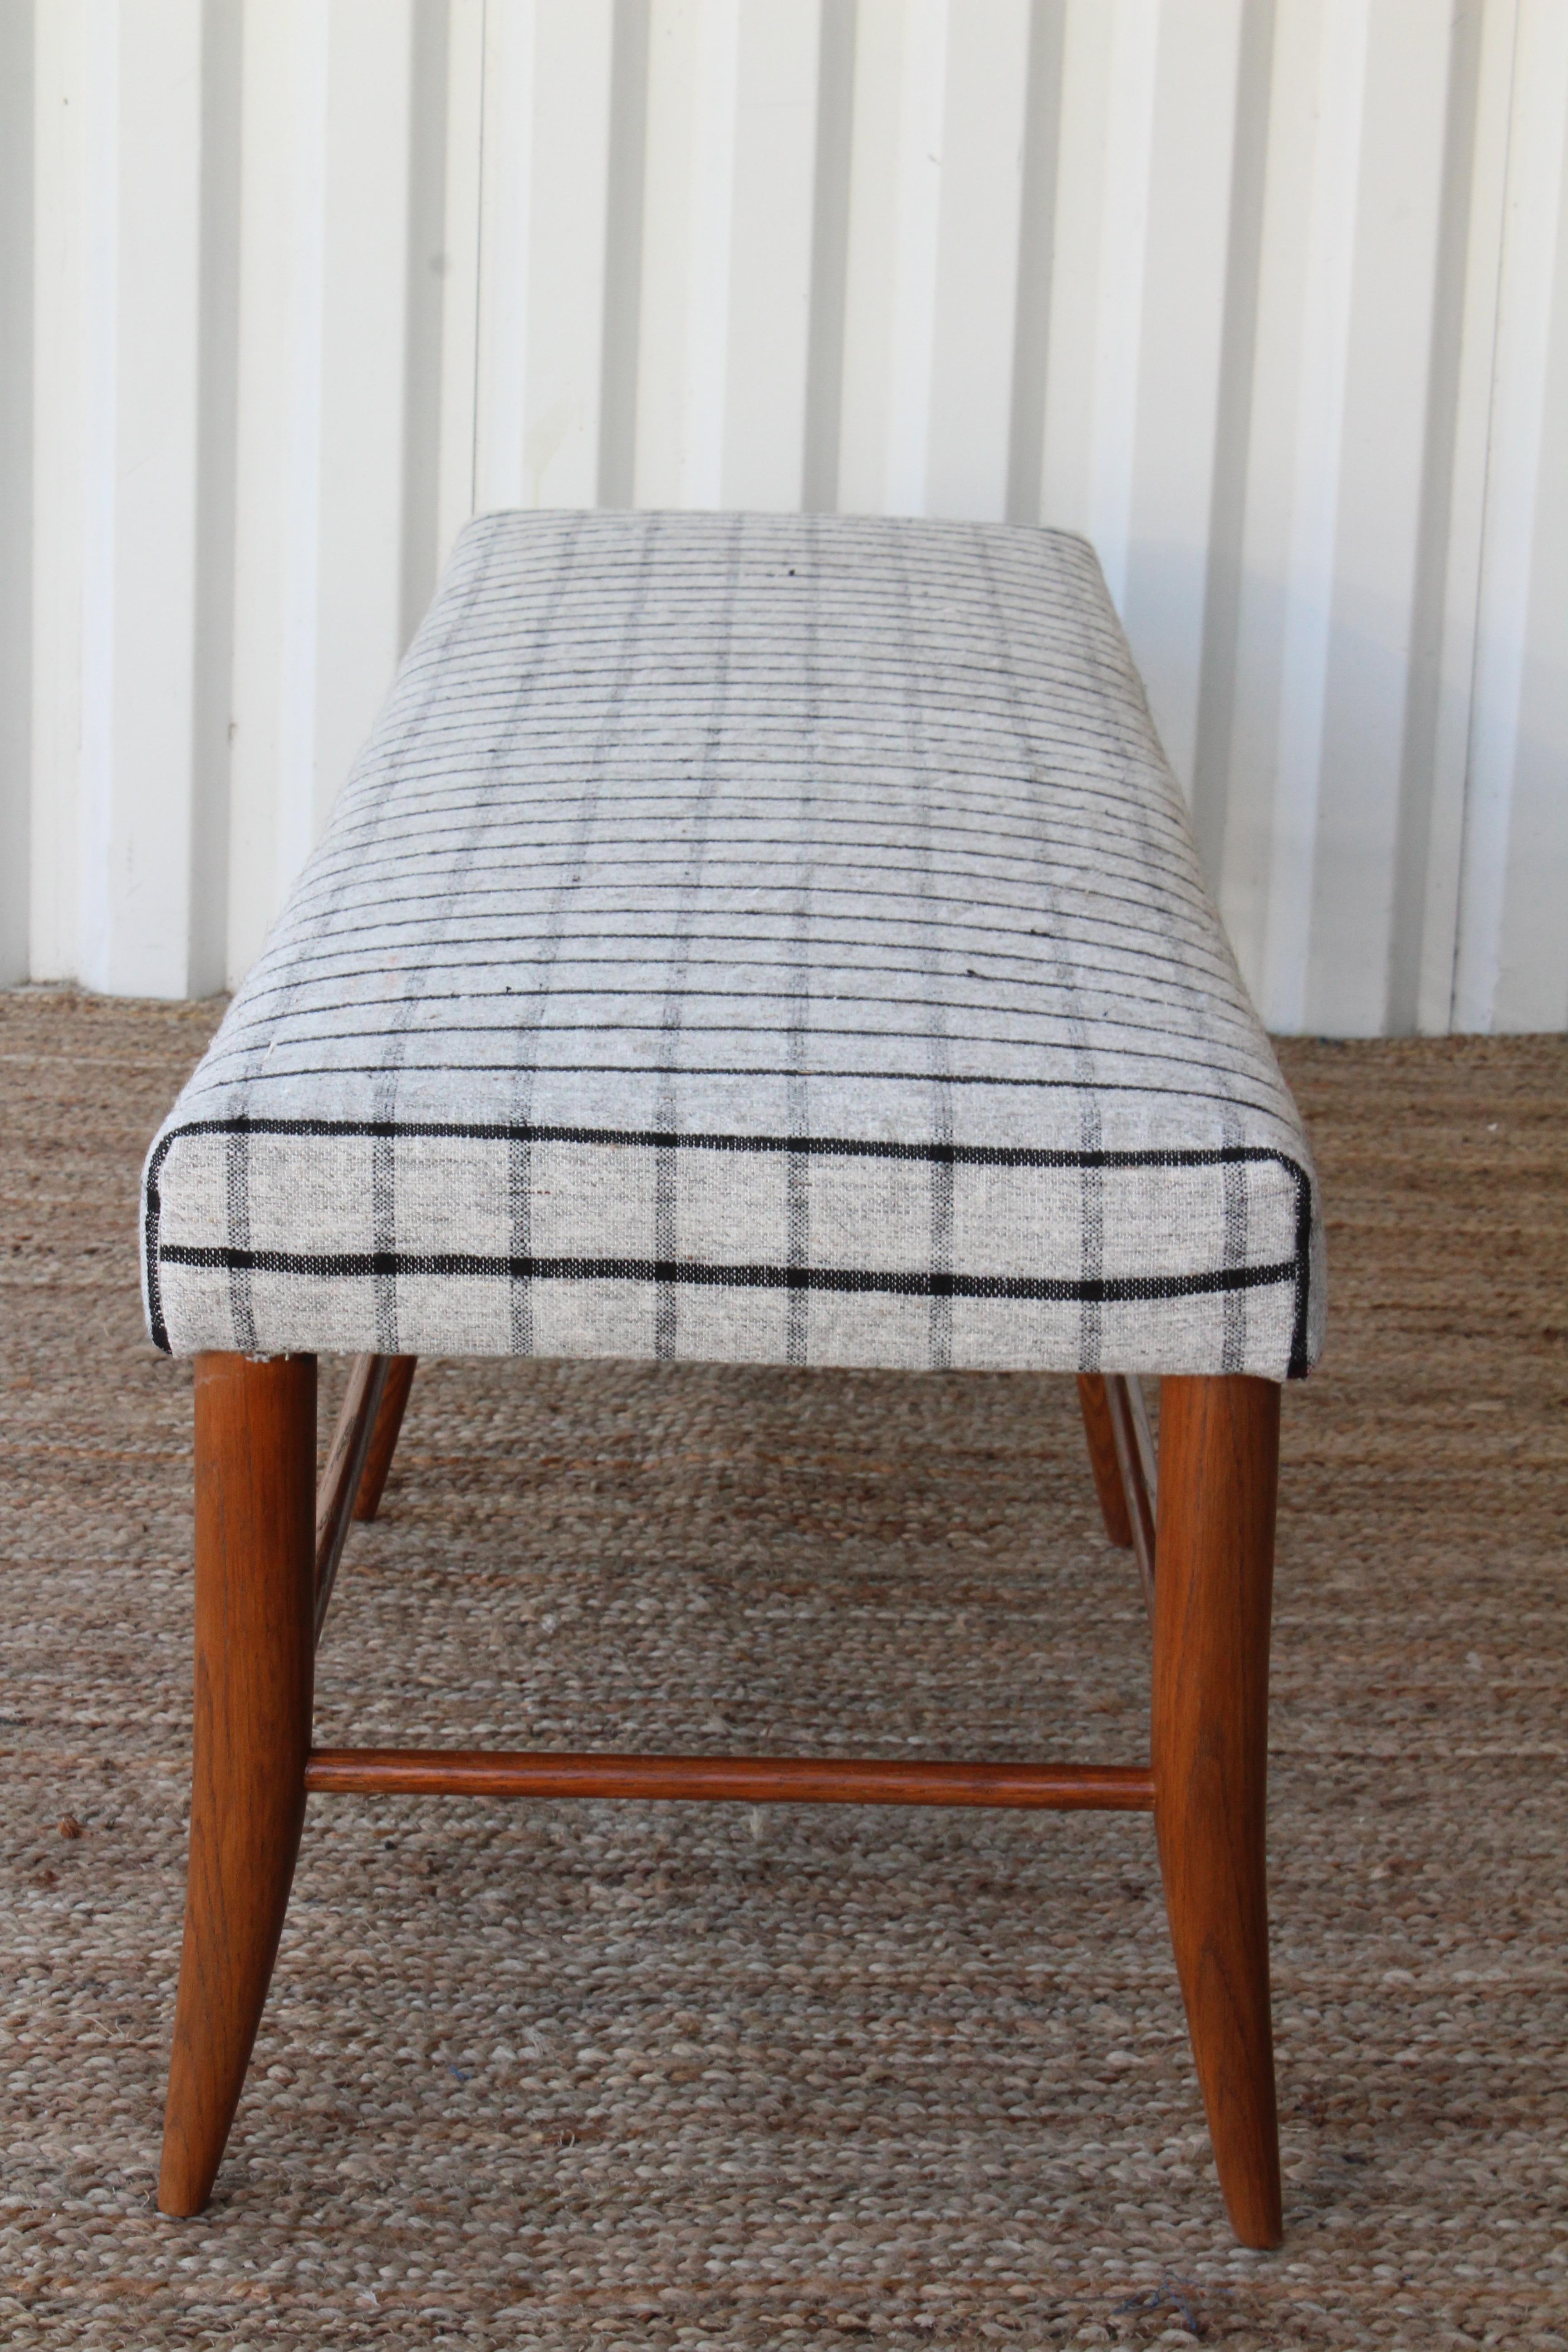 Contemporary Custom Croft Bench in Oak Upholstered in a Vintage Wool Textile